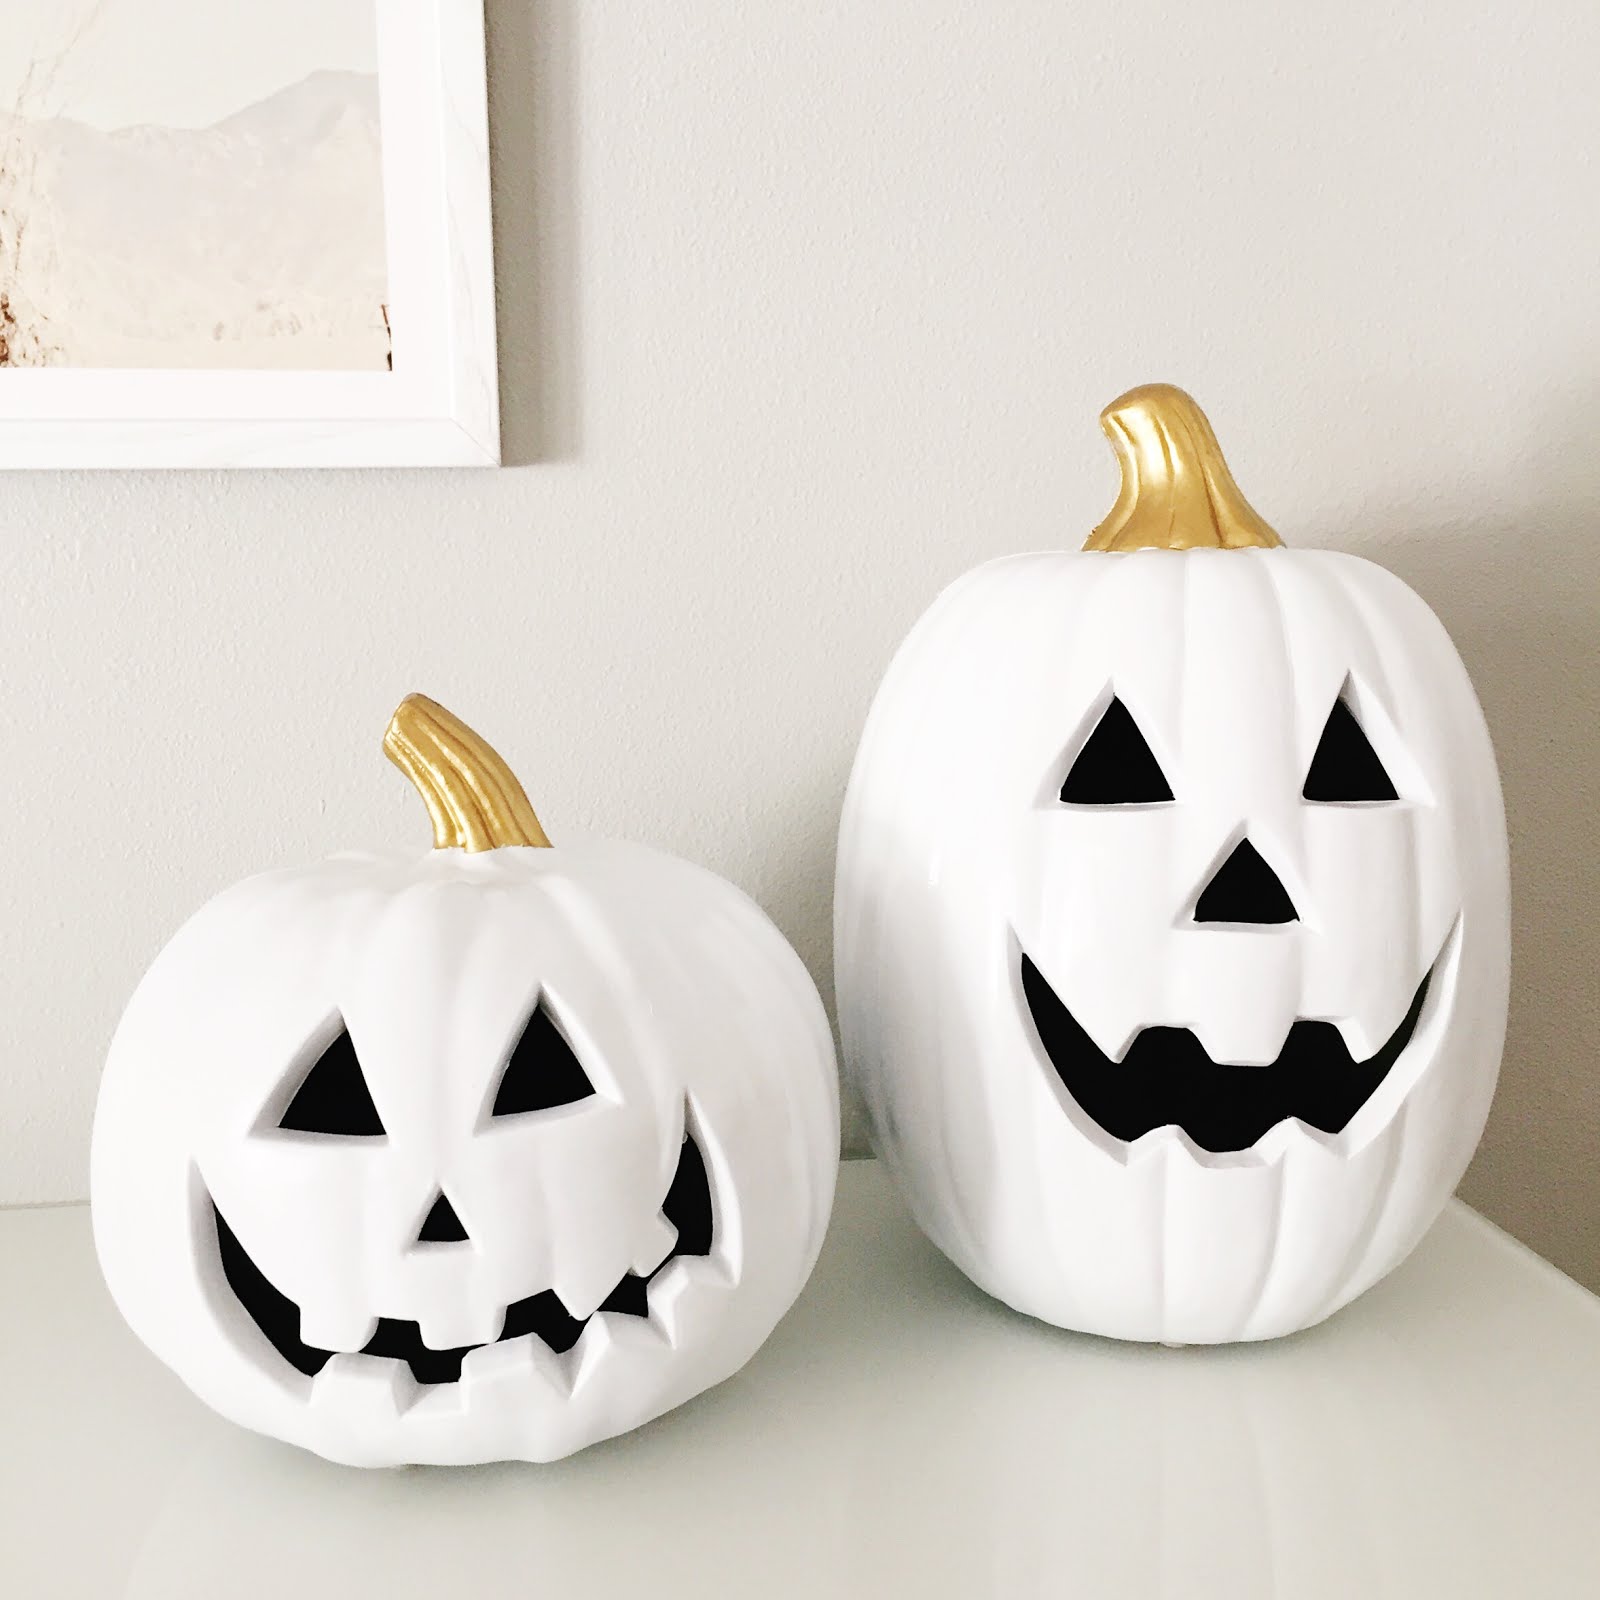 Petite Insanities: DIY // White and Gold Pumpkins